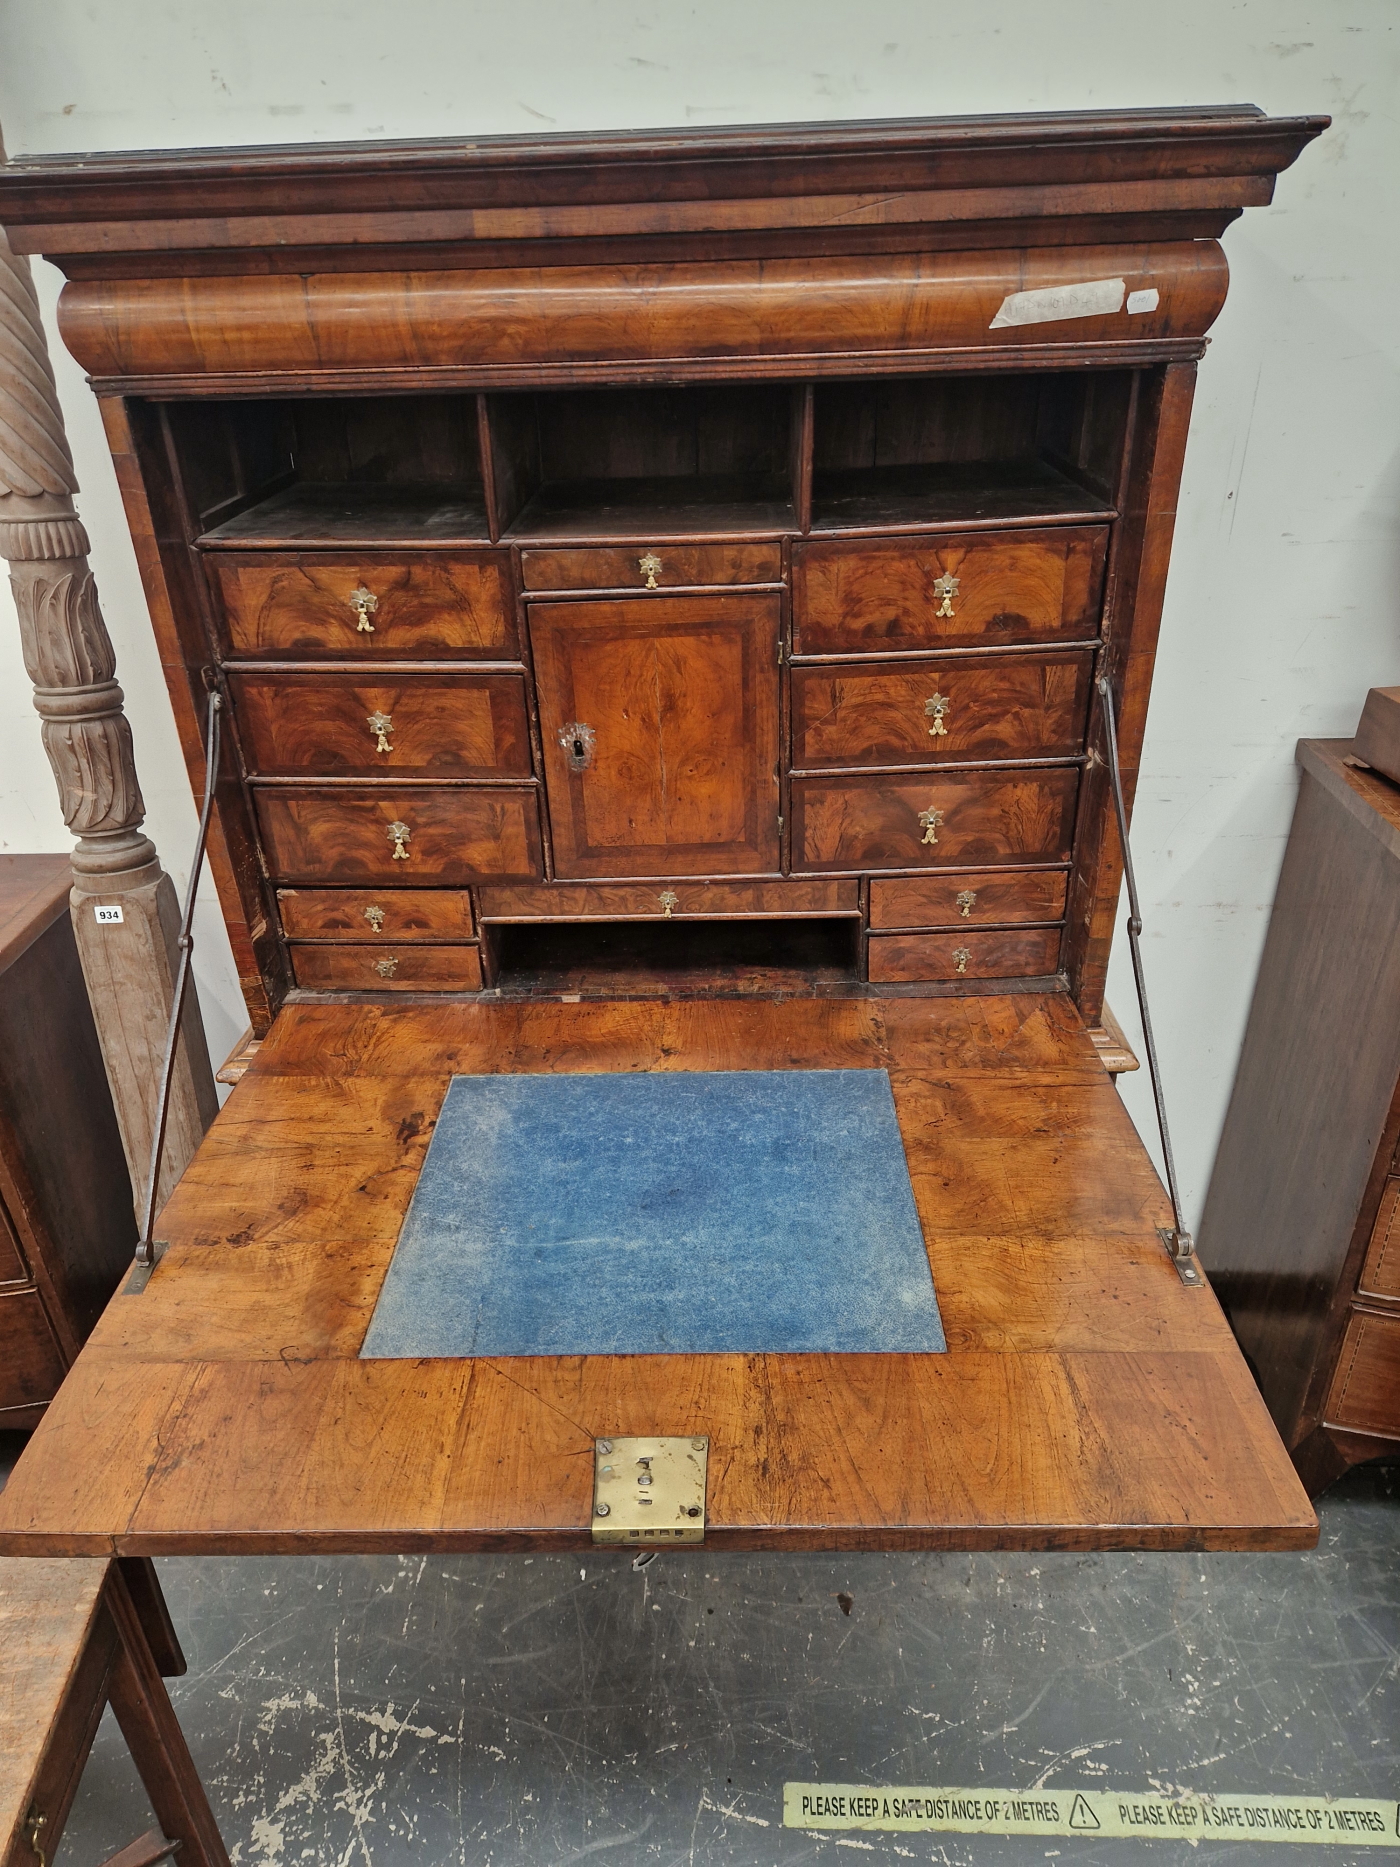 AN EARLY 18th C. WALNUT DROP FRONT BUREAU CHEST, AN OVOLO FRONT DRAWER ABOVE THE FALL, THE BASE WITH - Image 4 of 9